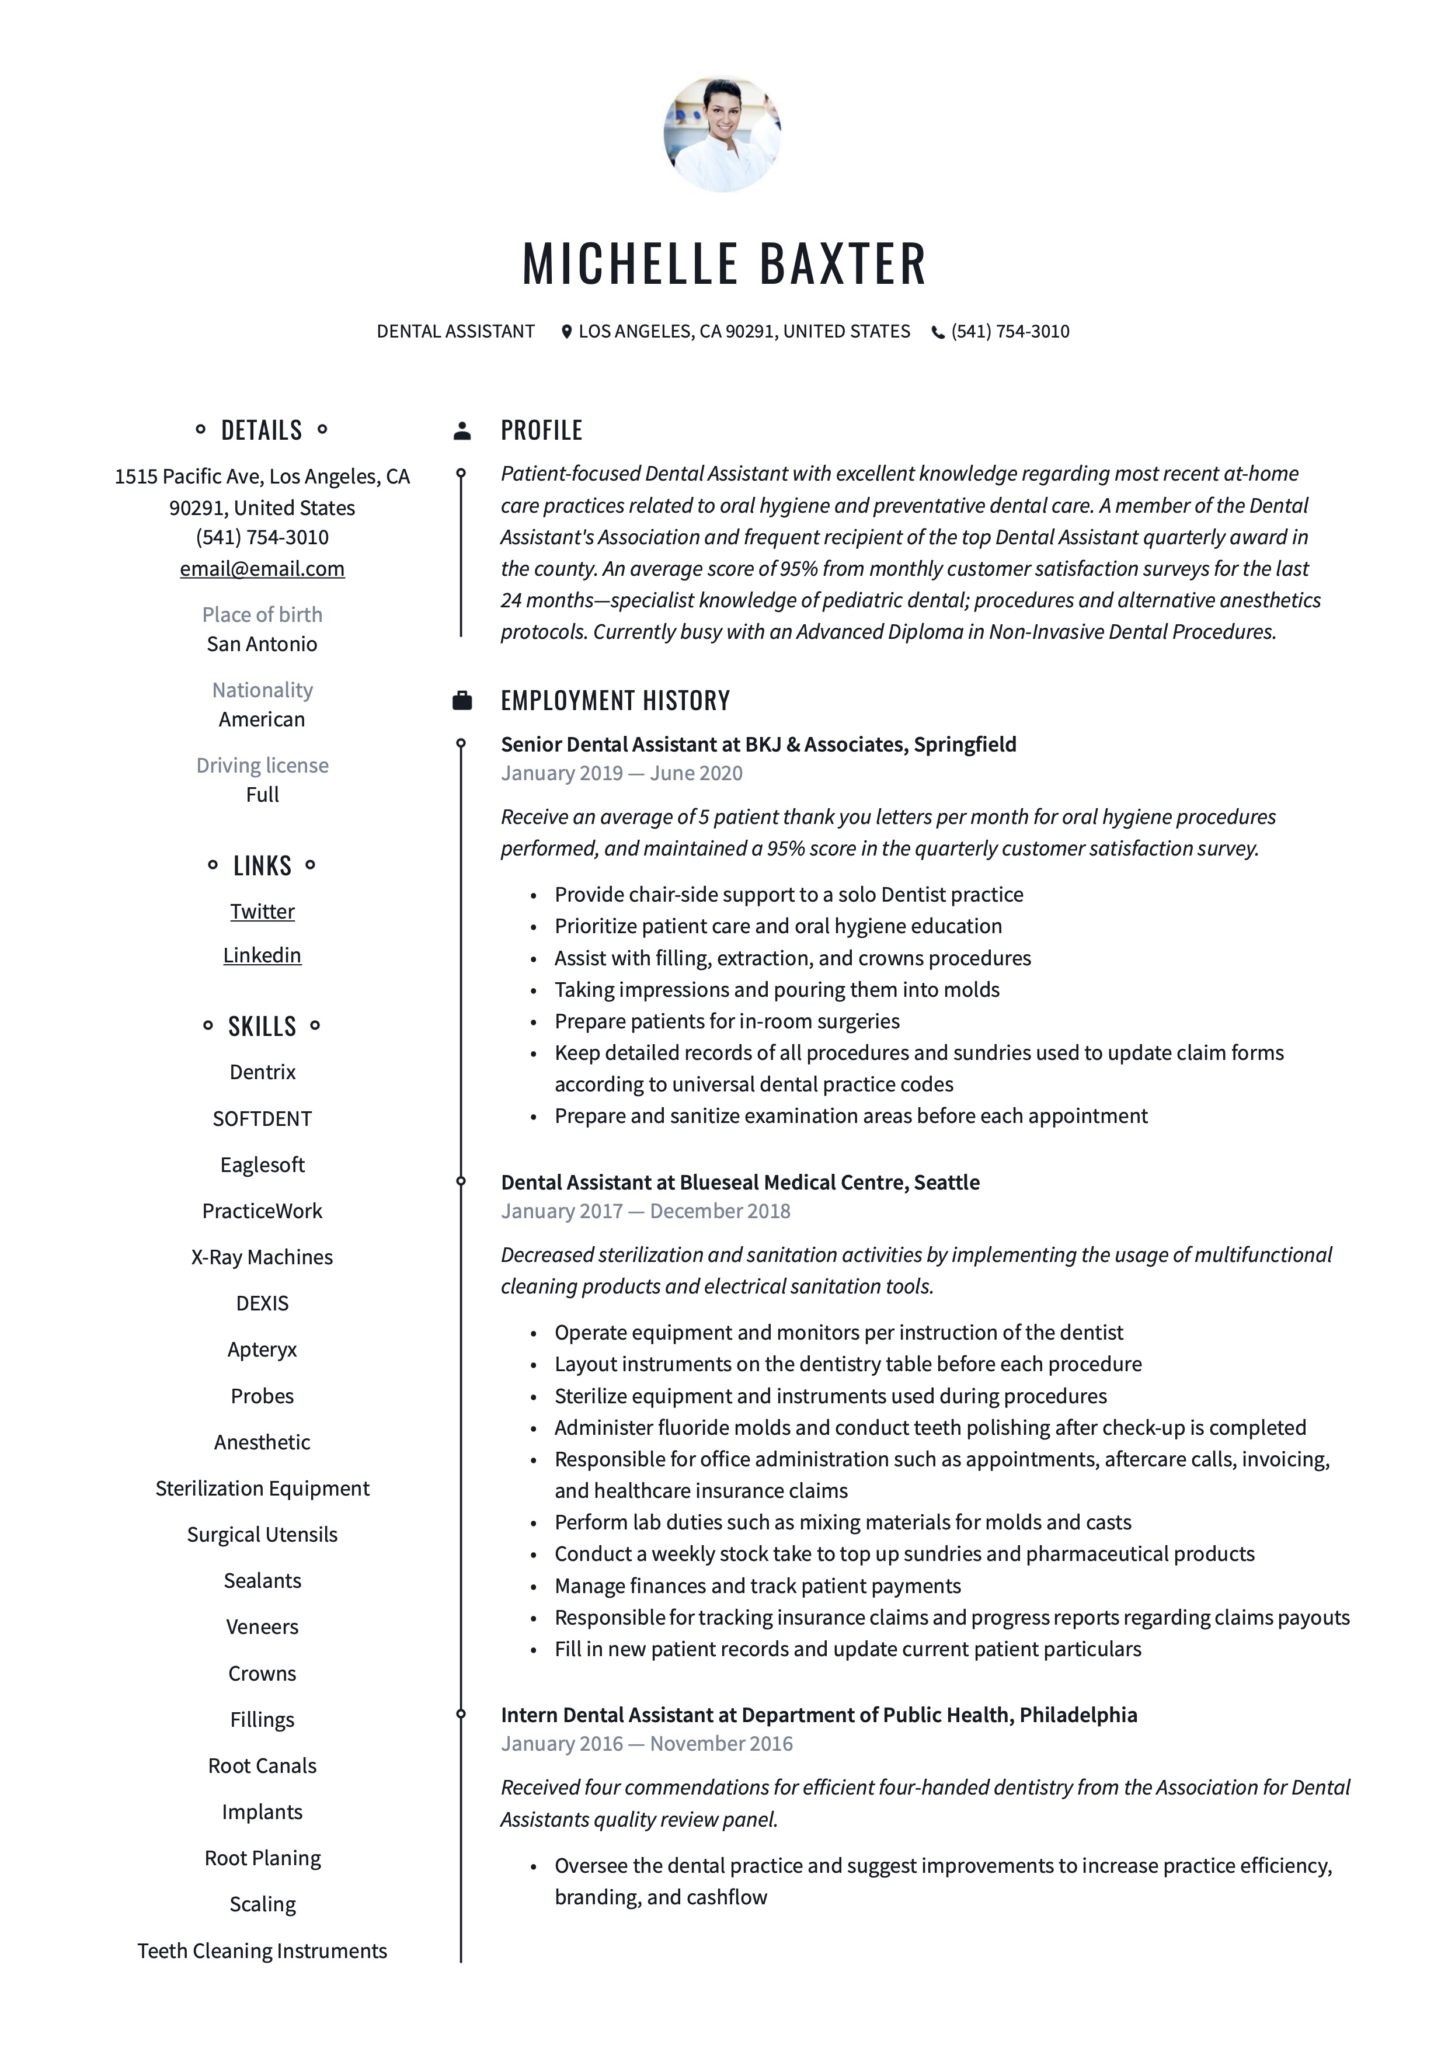 Professional Resume Example Dental Assistant